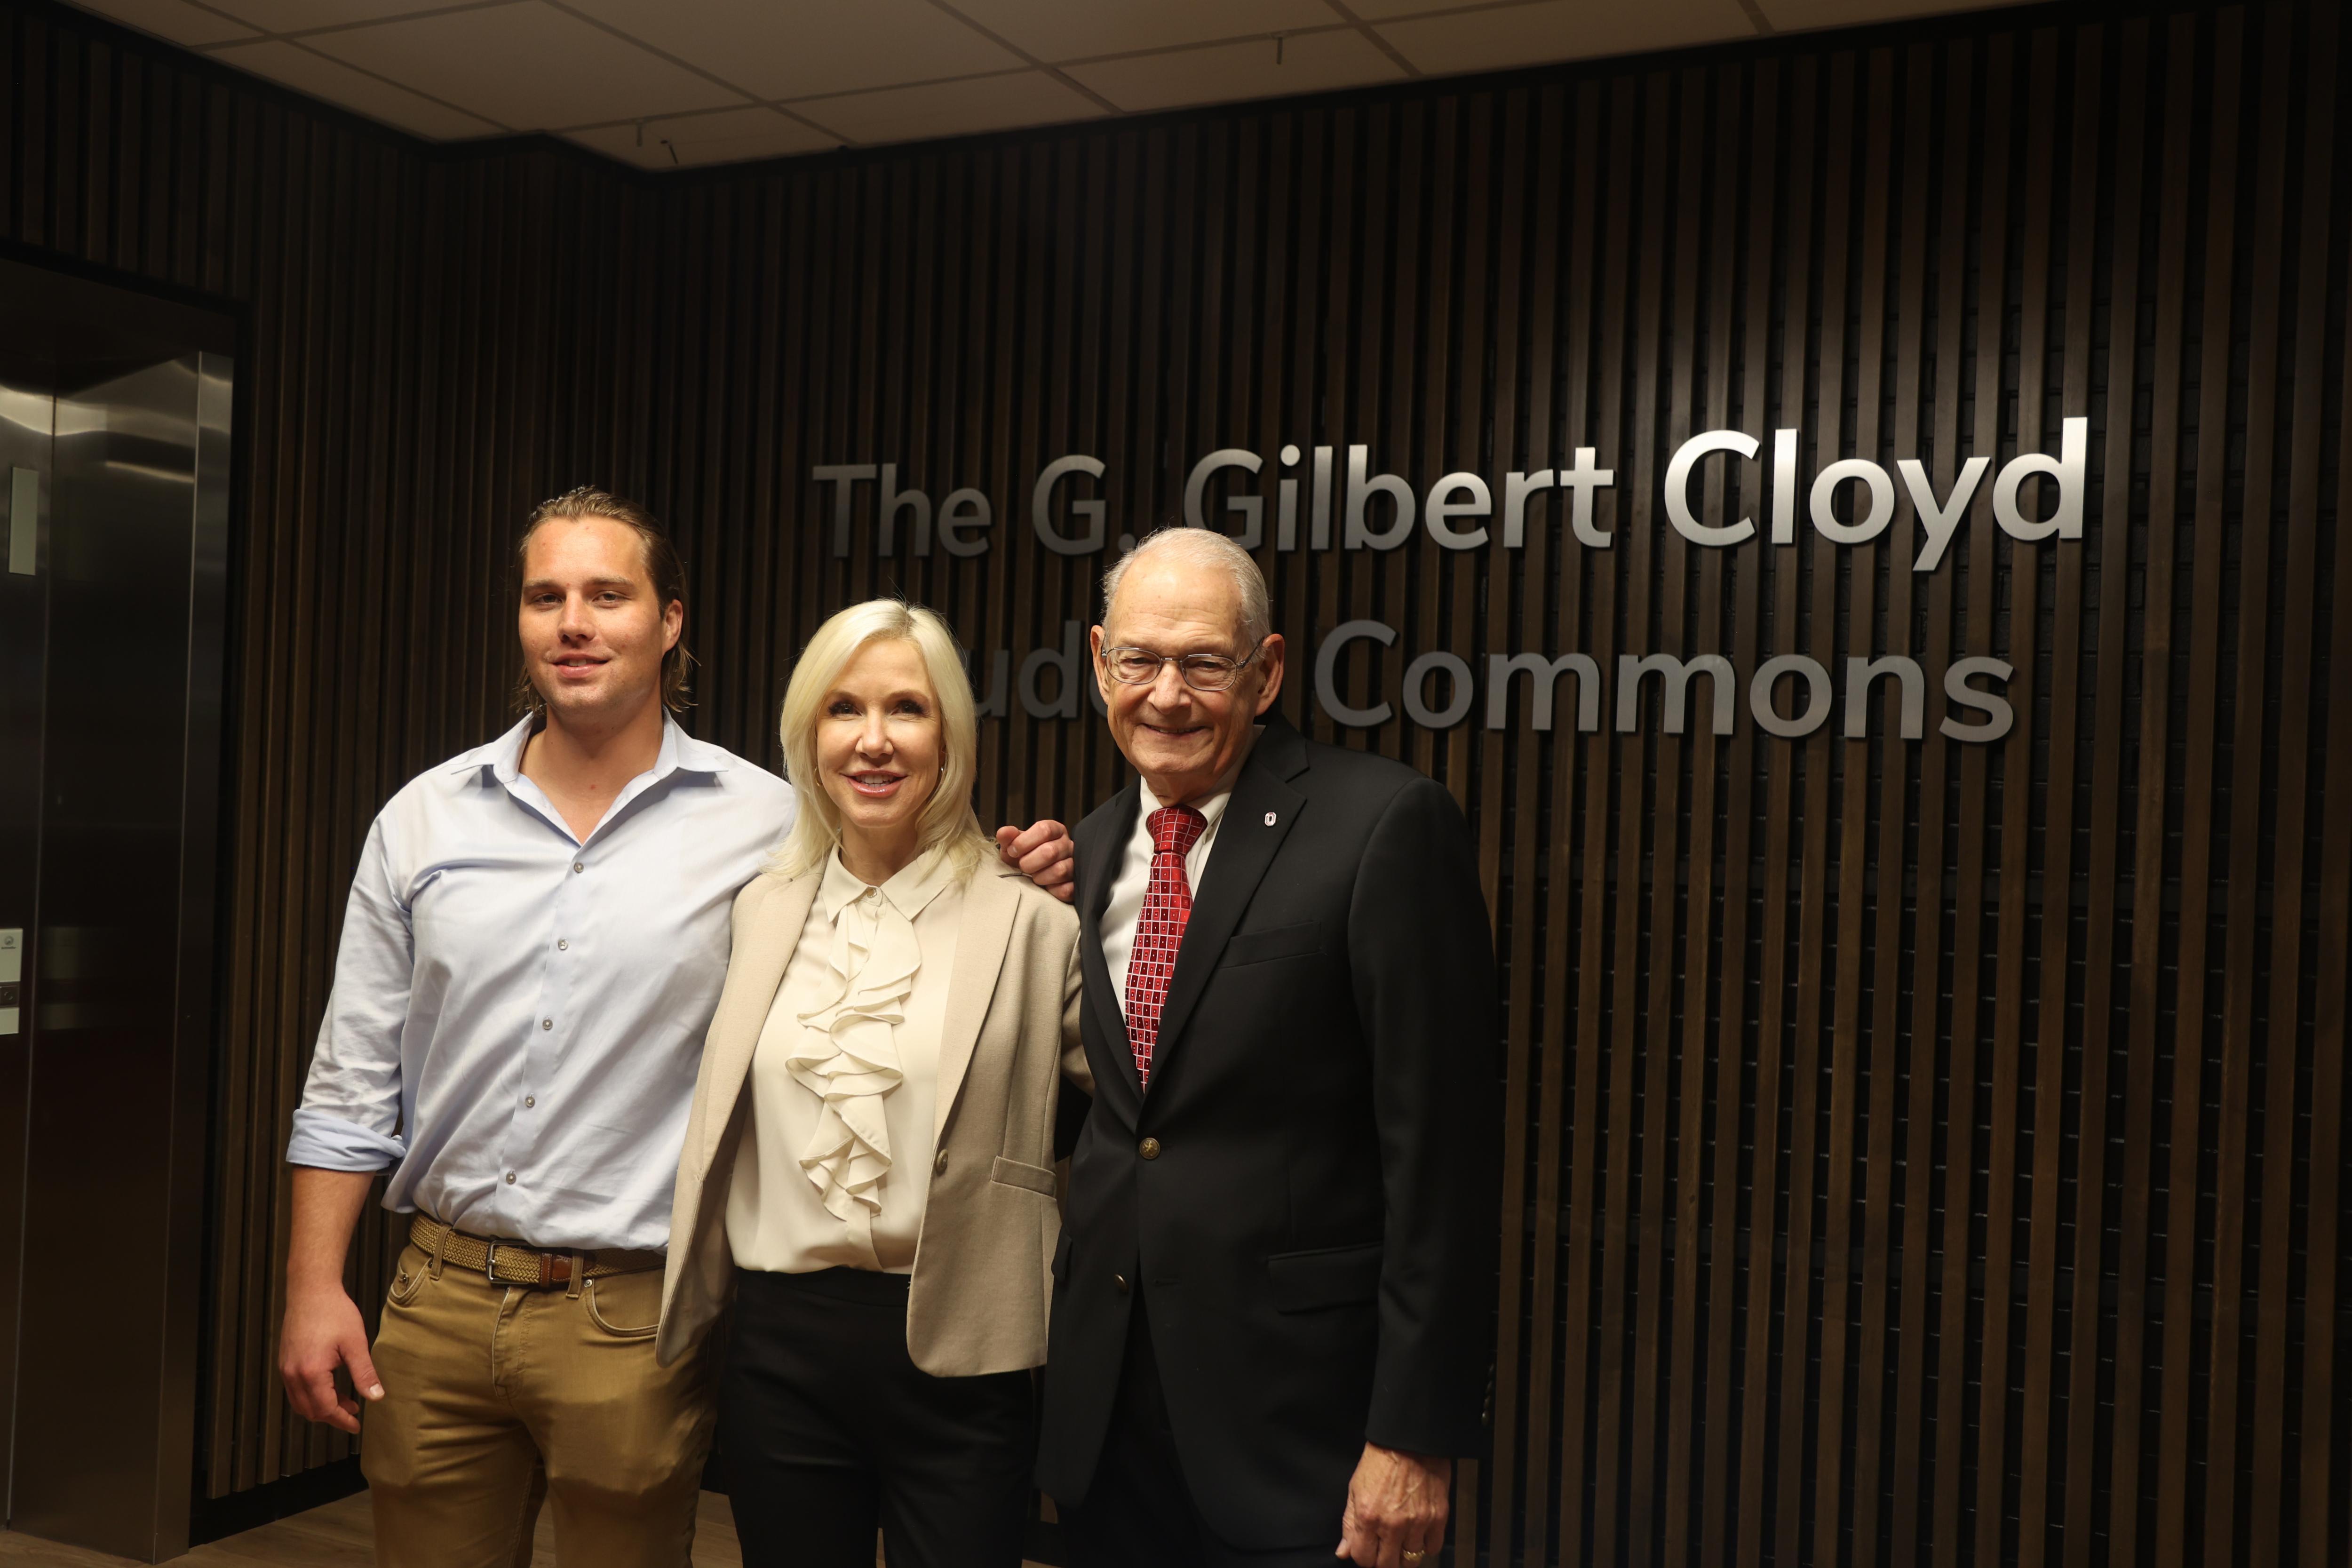 Will Navin, Lisa Navin and Gil Cloyd in front of the G. Gilbert Cloyd Student Commons sign